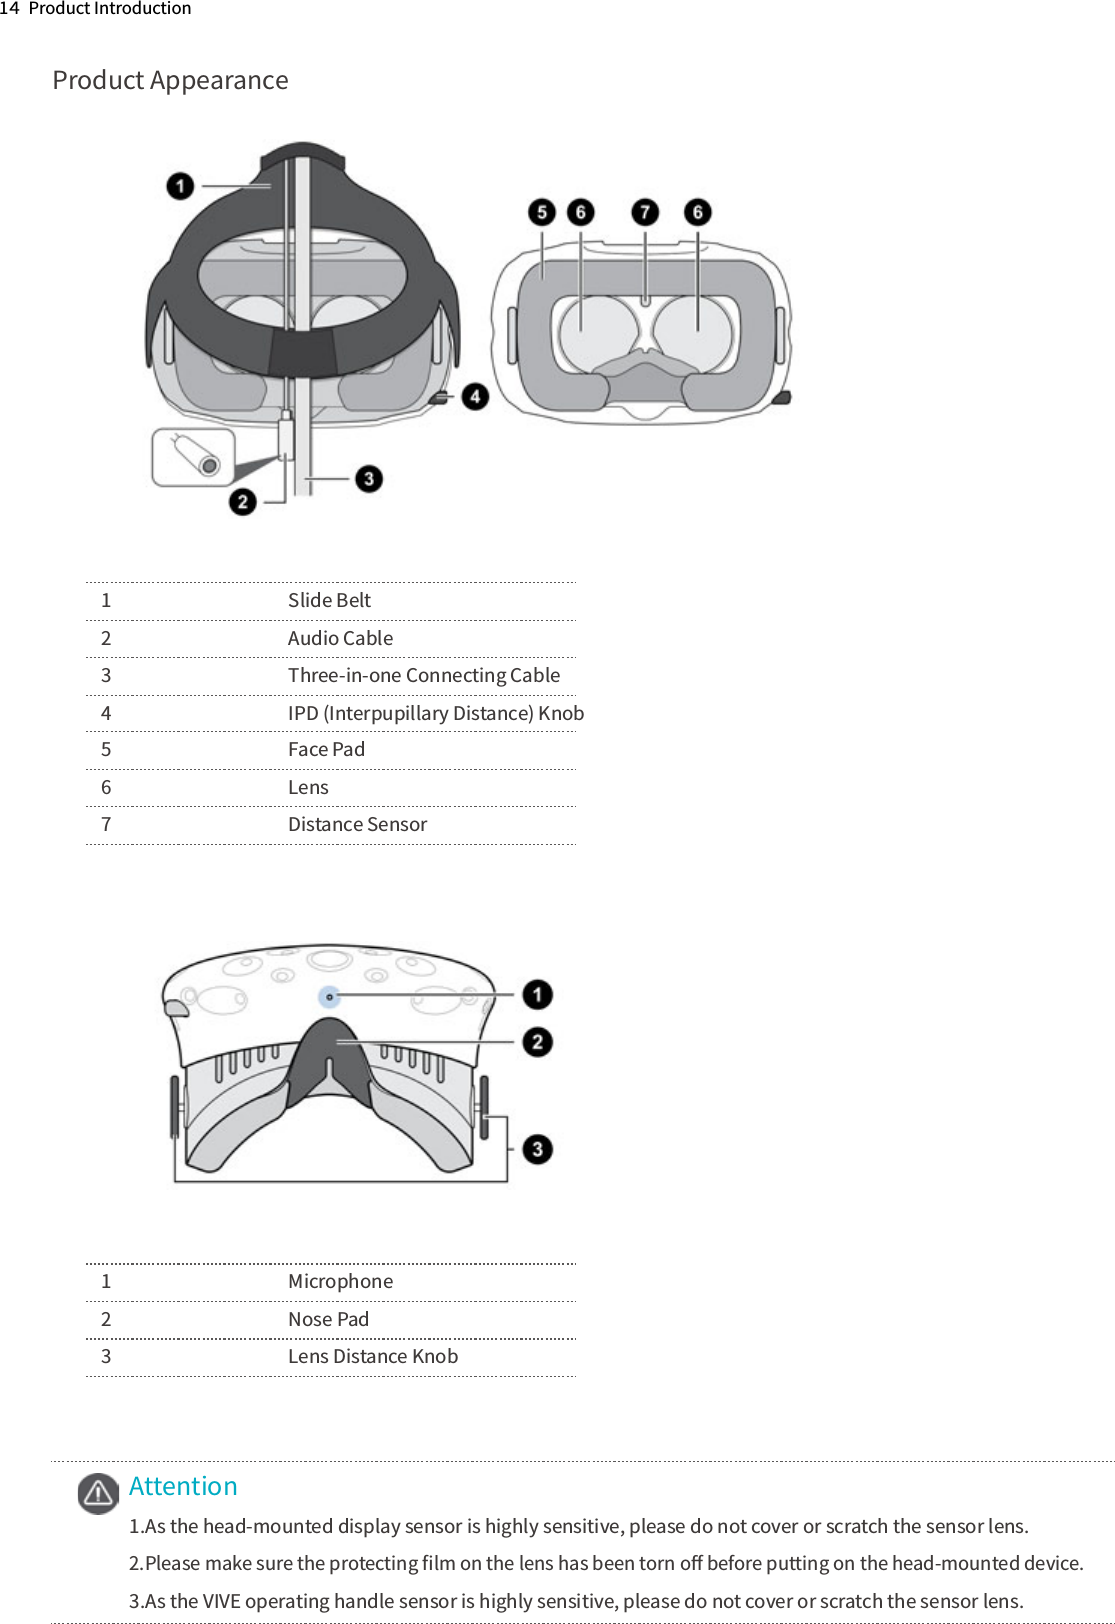 1４  Product IntroductionProduct Appearance1      Slide Belt 2      Audio Cable3      Three-in-one Connecting Cable 4      IPD (Interpupillary Distance) Knob5      Face Pad 6      Lens7      Distance Sensor1      Microphone2      Nose Pad3      Lens Distance KnobAttention1.As the head-mounted display sensor is highly sensitive, please do not cover or scratch the sensor lens.2.Please make sure the protecting ﬁlm on the lens has been torn oﬀ before putting on the head-mounted device.3.As the VIVE operating handle sensor is highly sensitive, please do not cover or scratch the sensor lens.